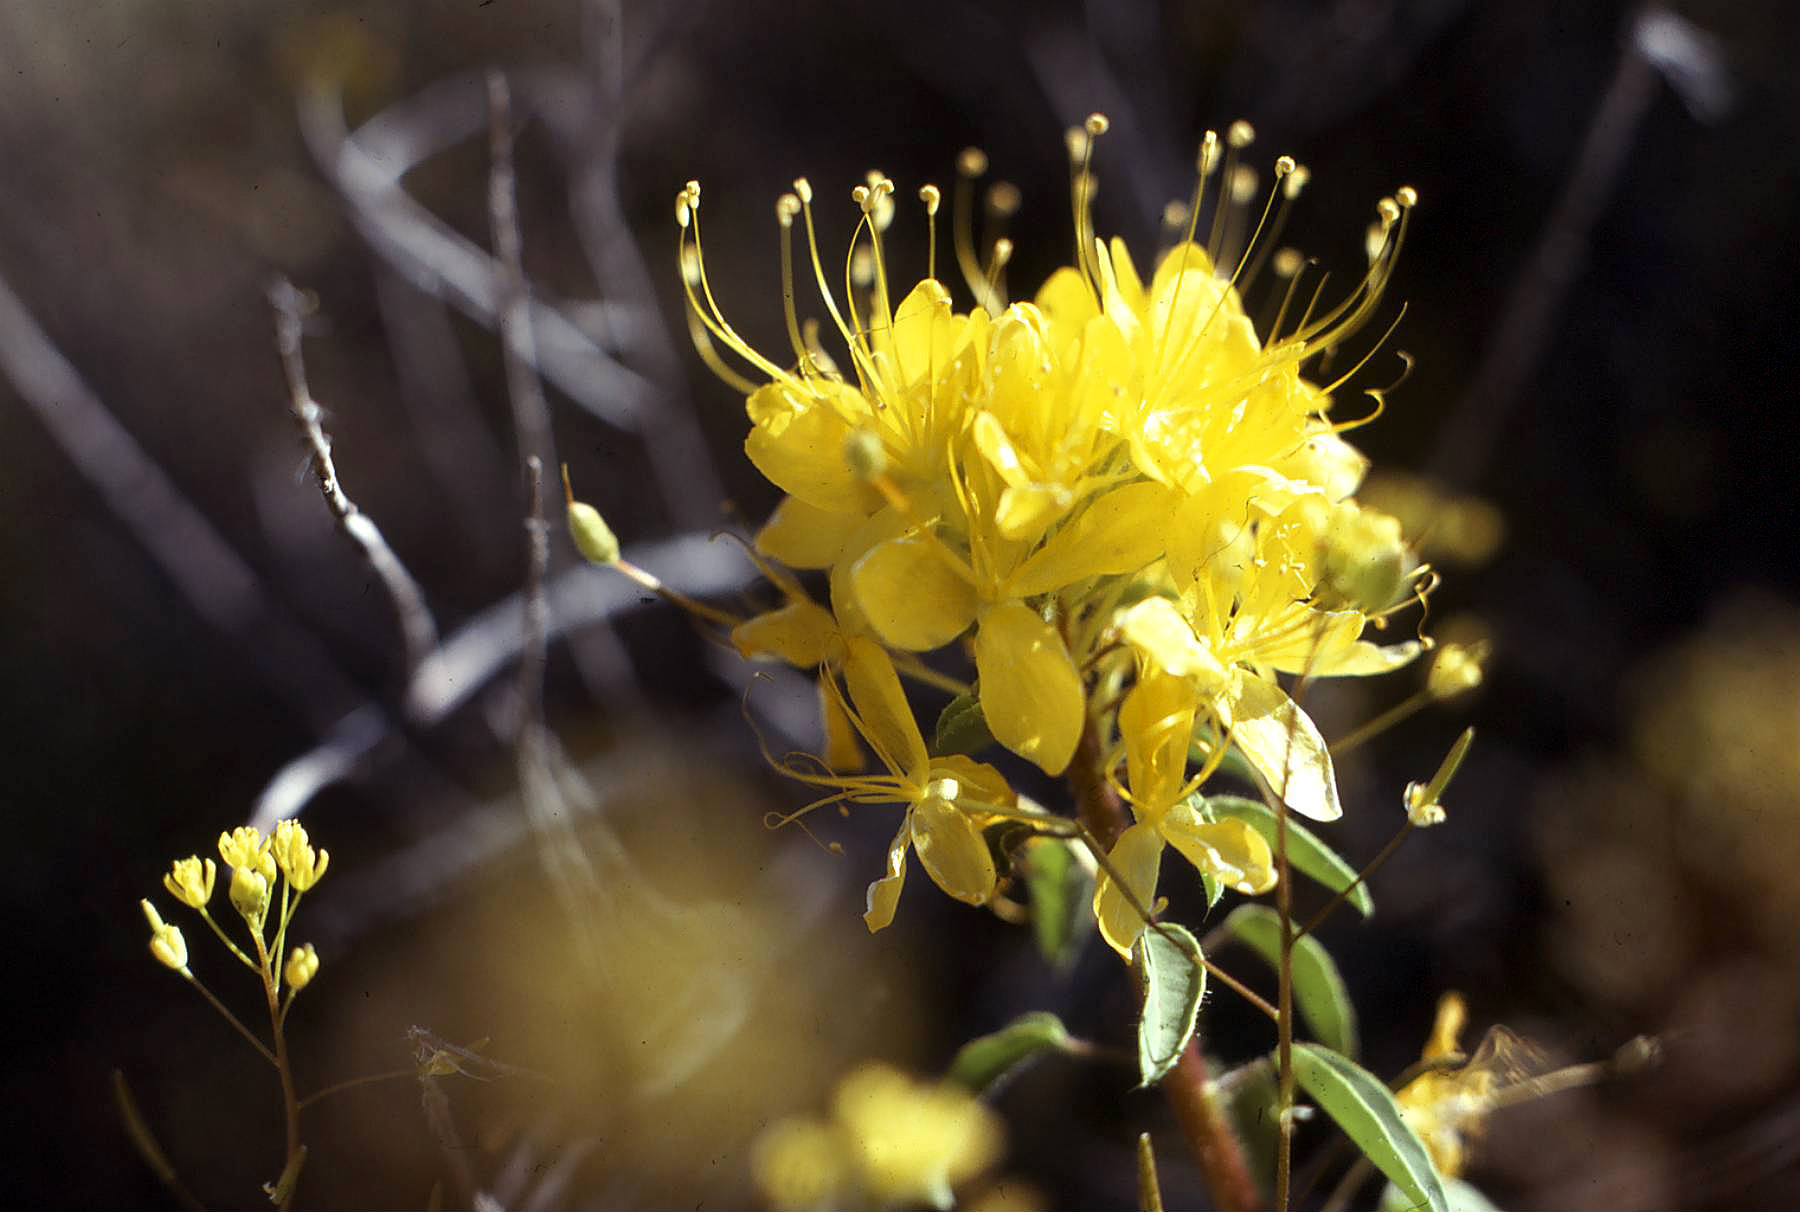 This image of the Golden Bee Plant shows yellow multiple petals and stamens that extend beyond the petals.